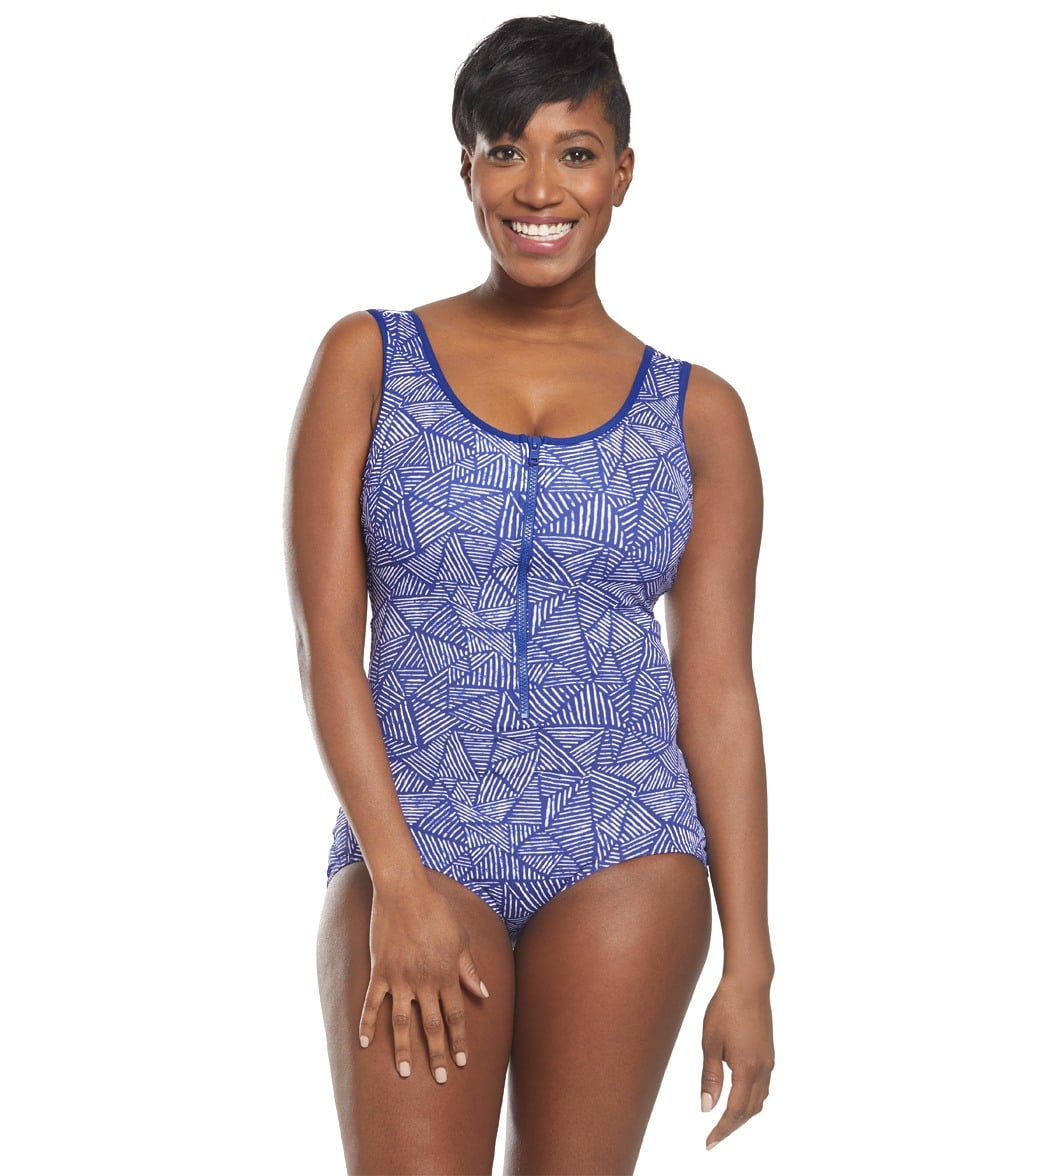 Women's Competition One Piece Swimsuits